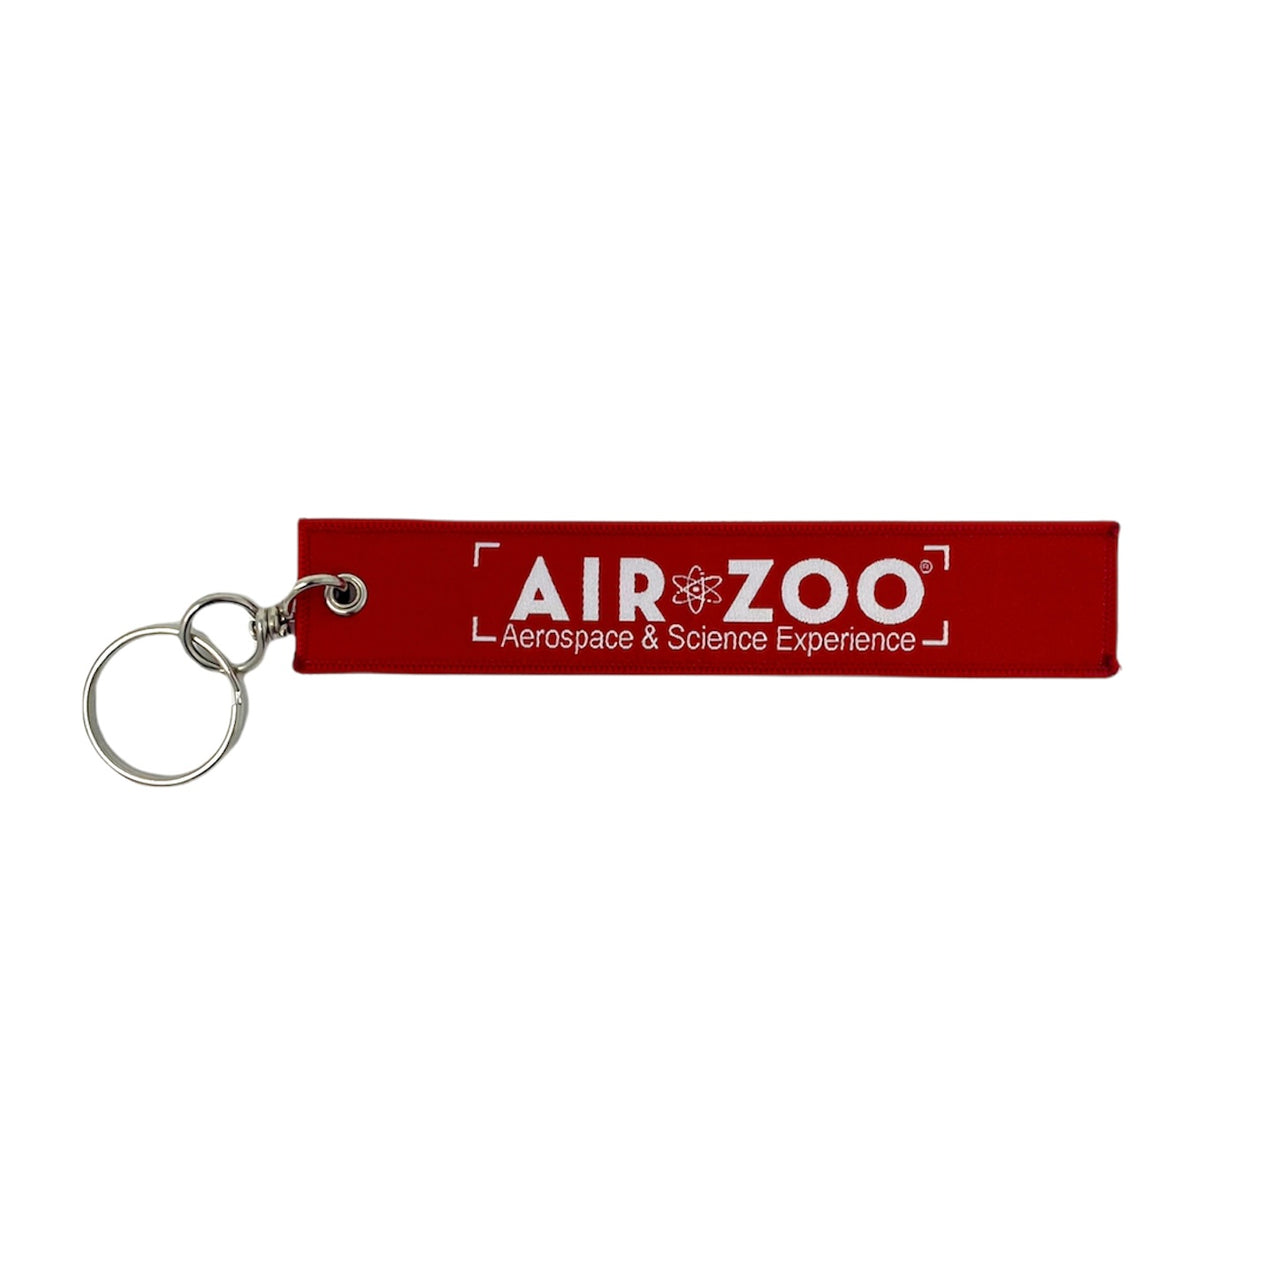 Remove Before Flight Air Zoo Keychain